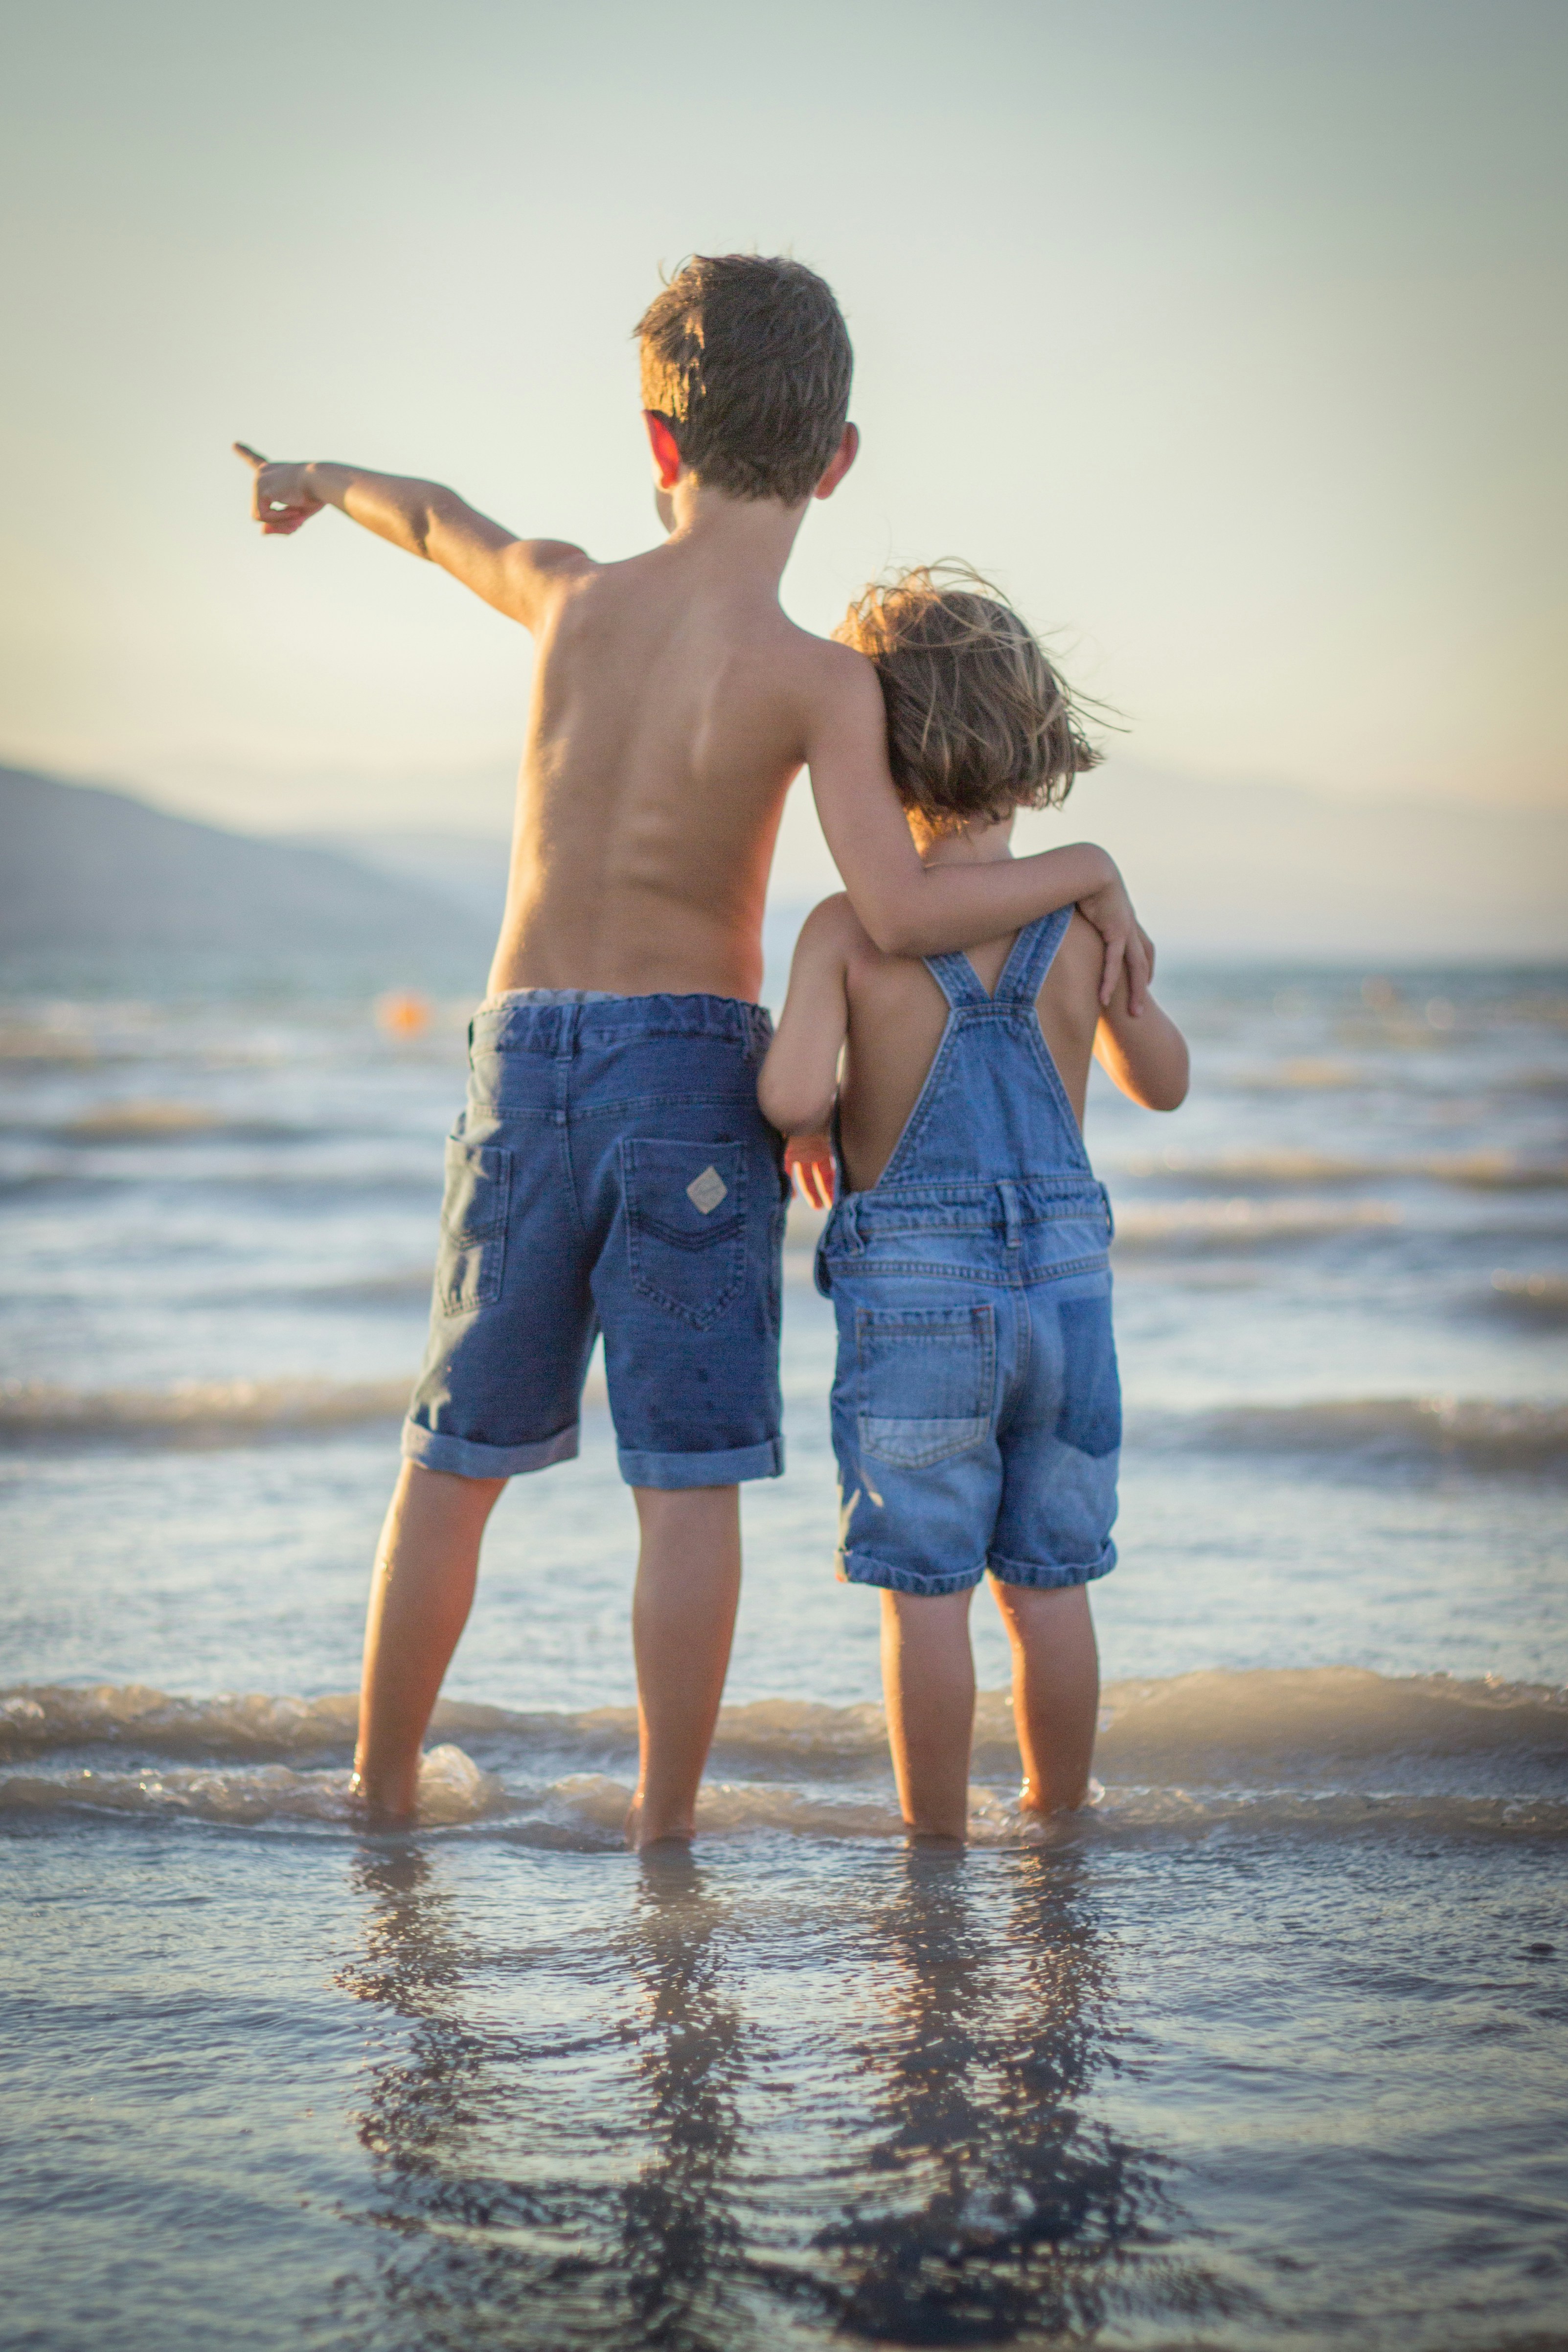 Young boy in jean shorts with arm around sibling at beach